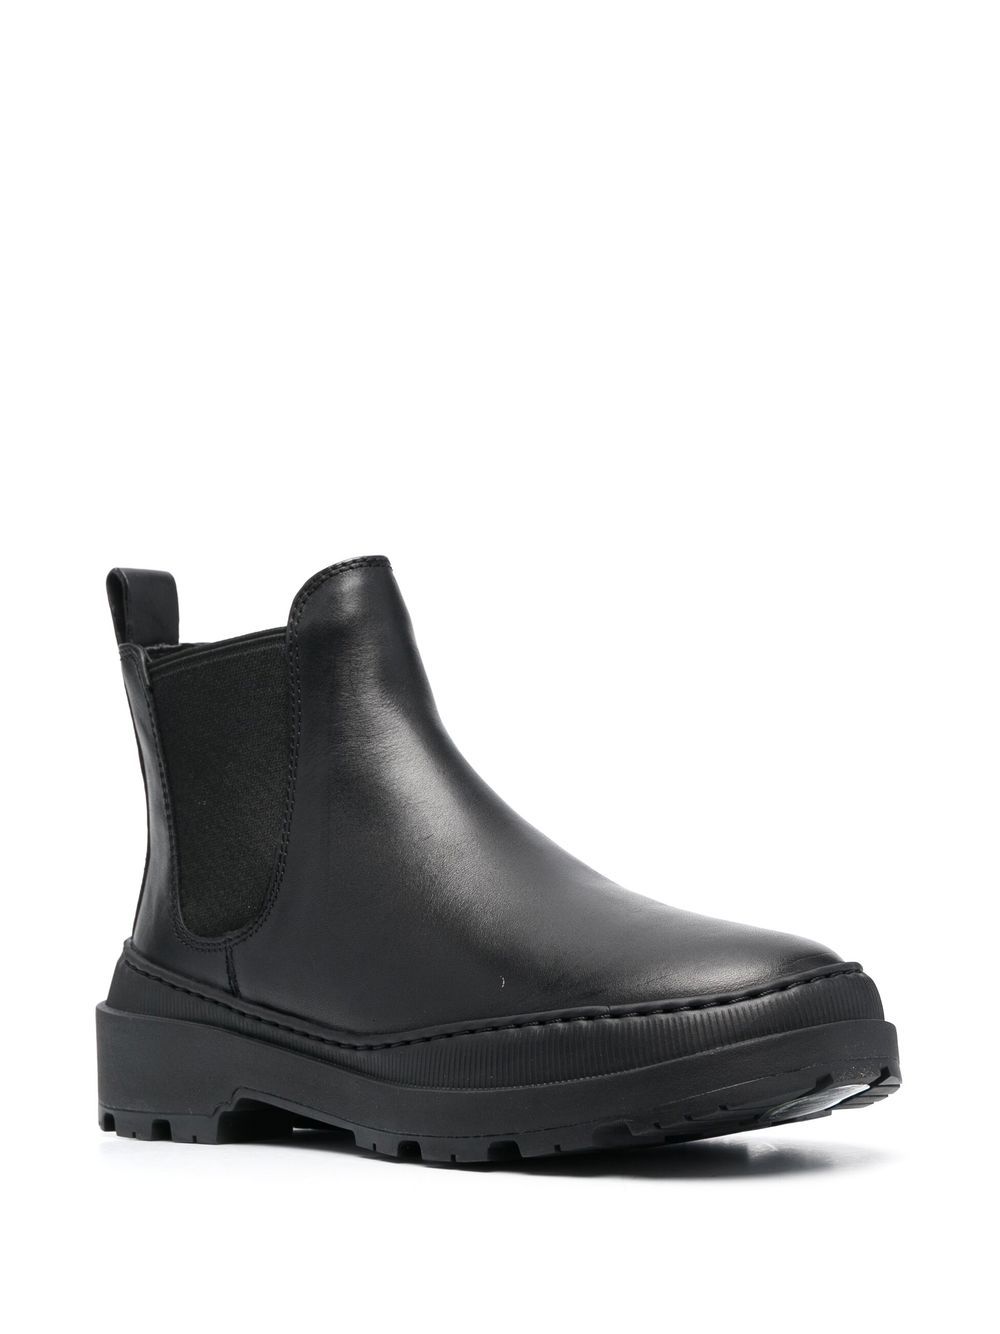 Camper Brutus Trek Leather Ankle Boots - Farfetch